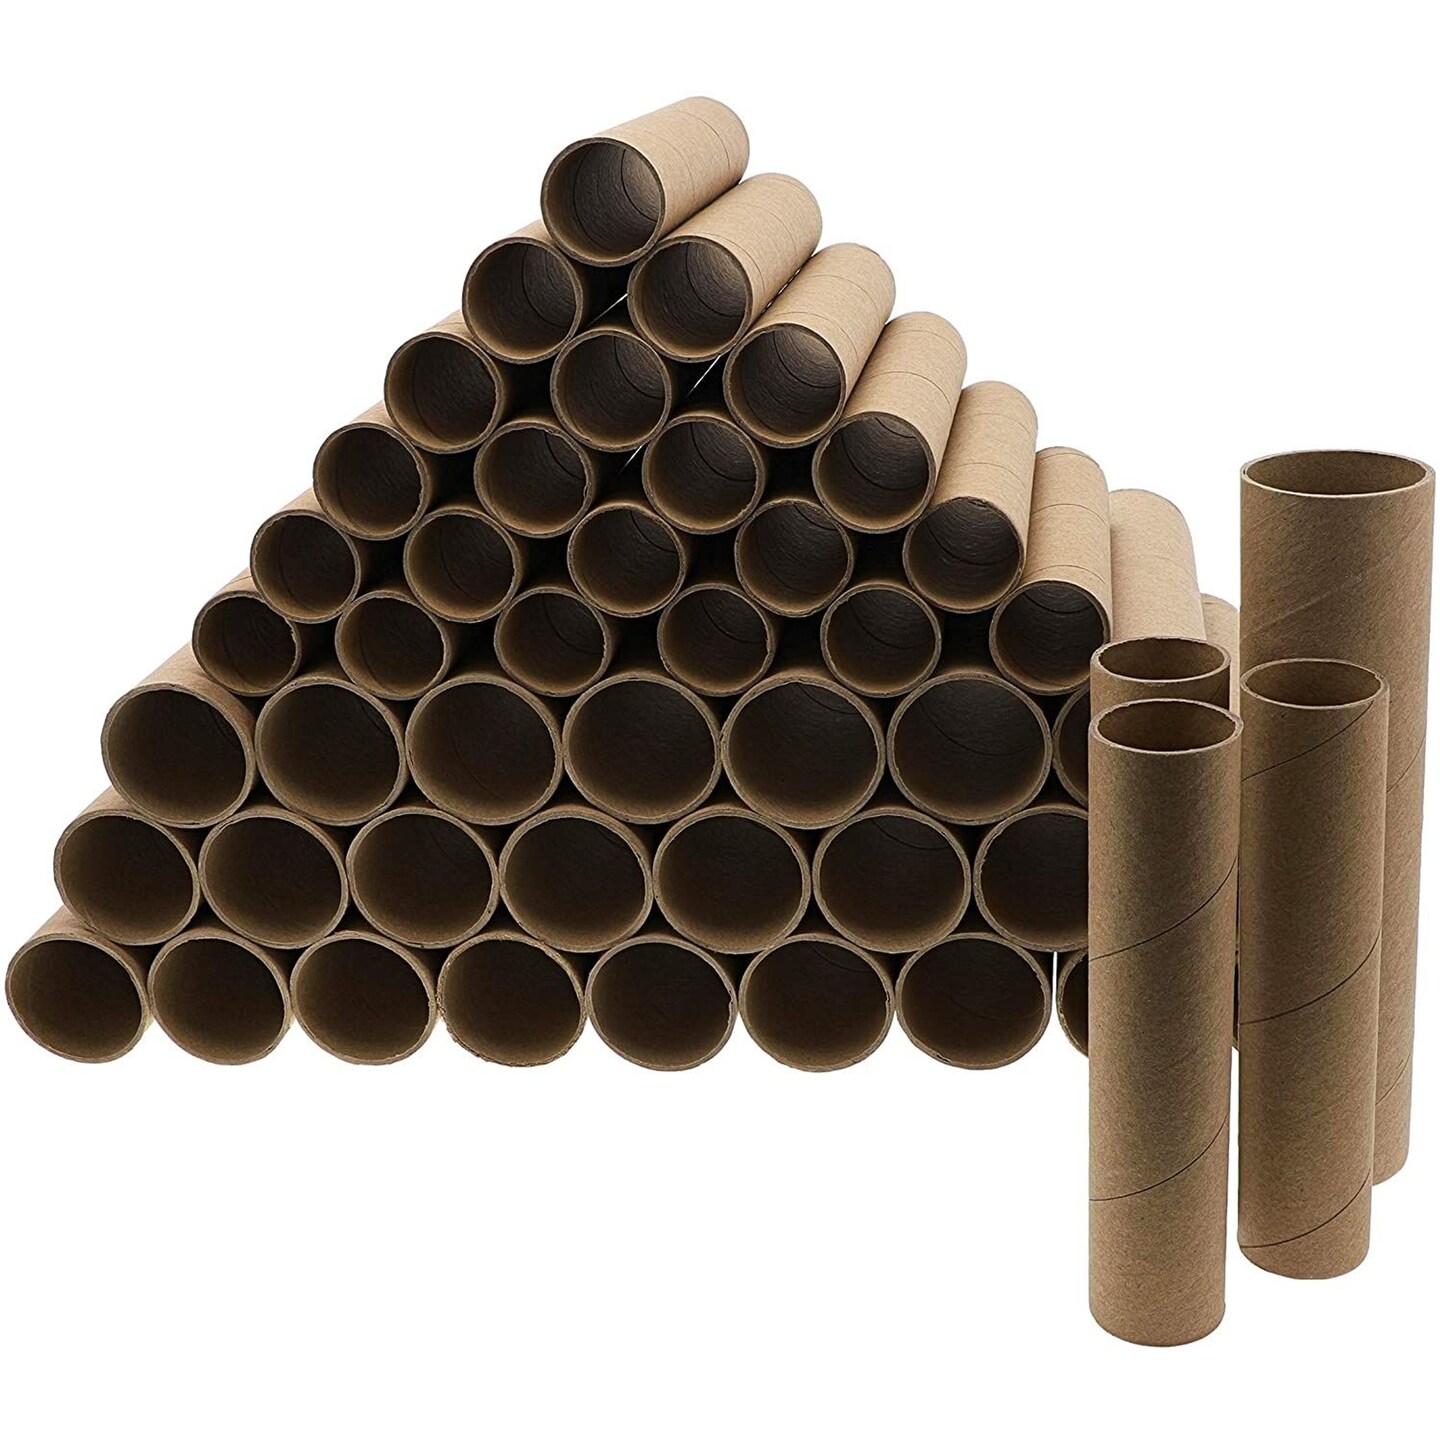 Tubes Cardboard Paper Tube Crafts Craft Roll Round Towel Rolls